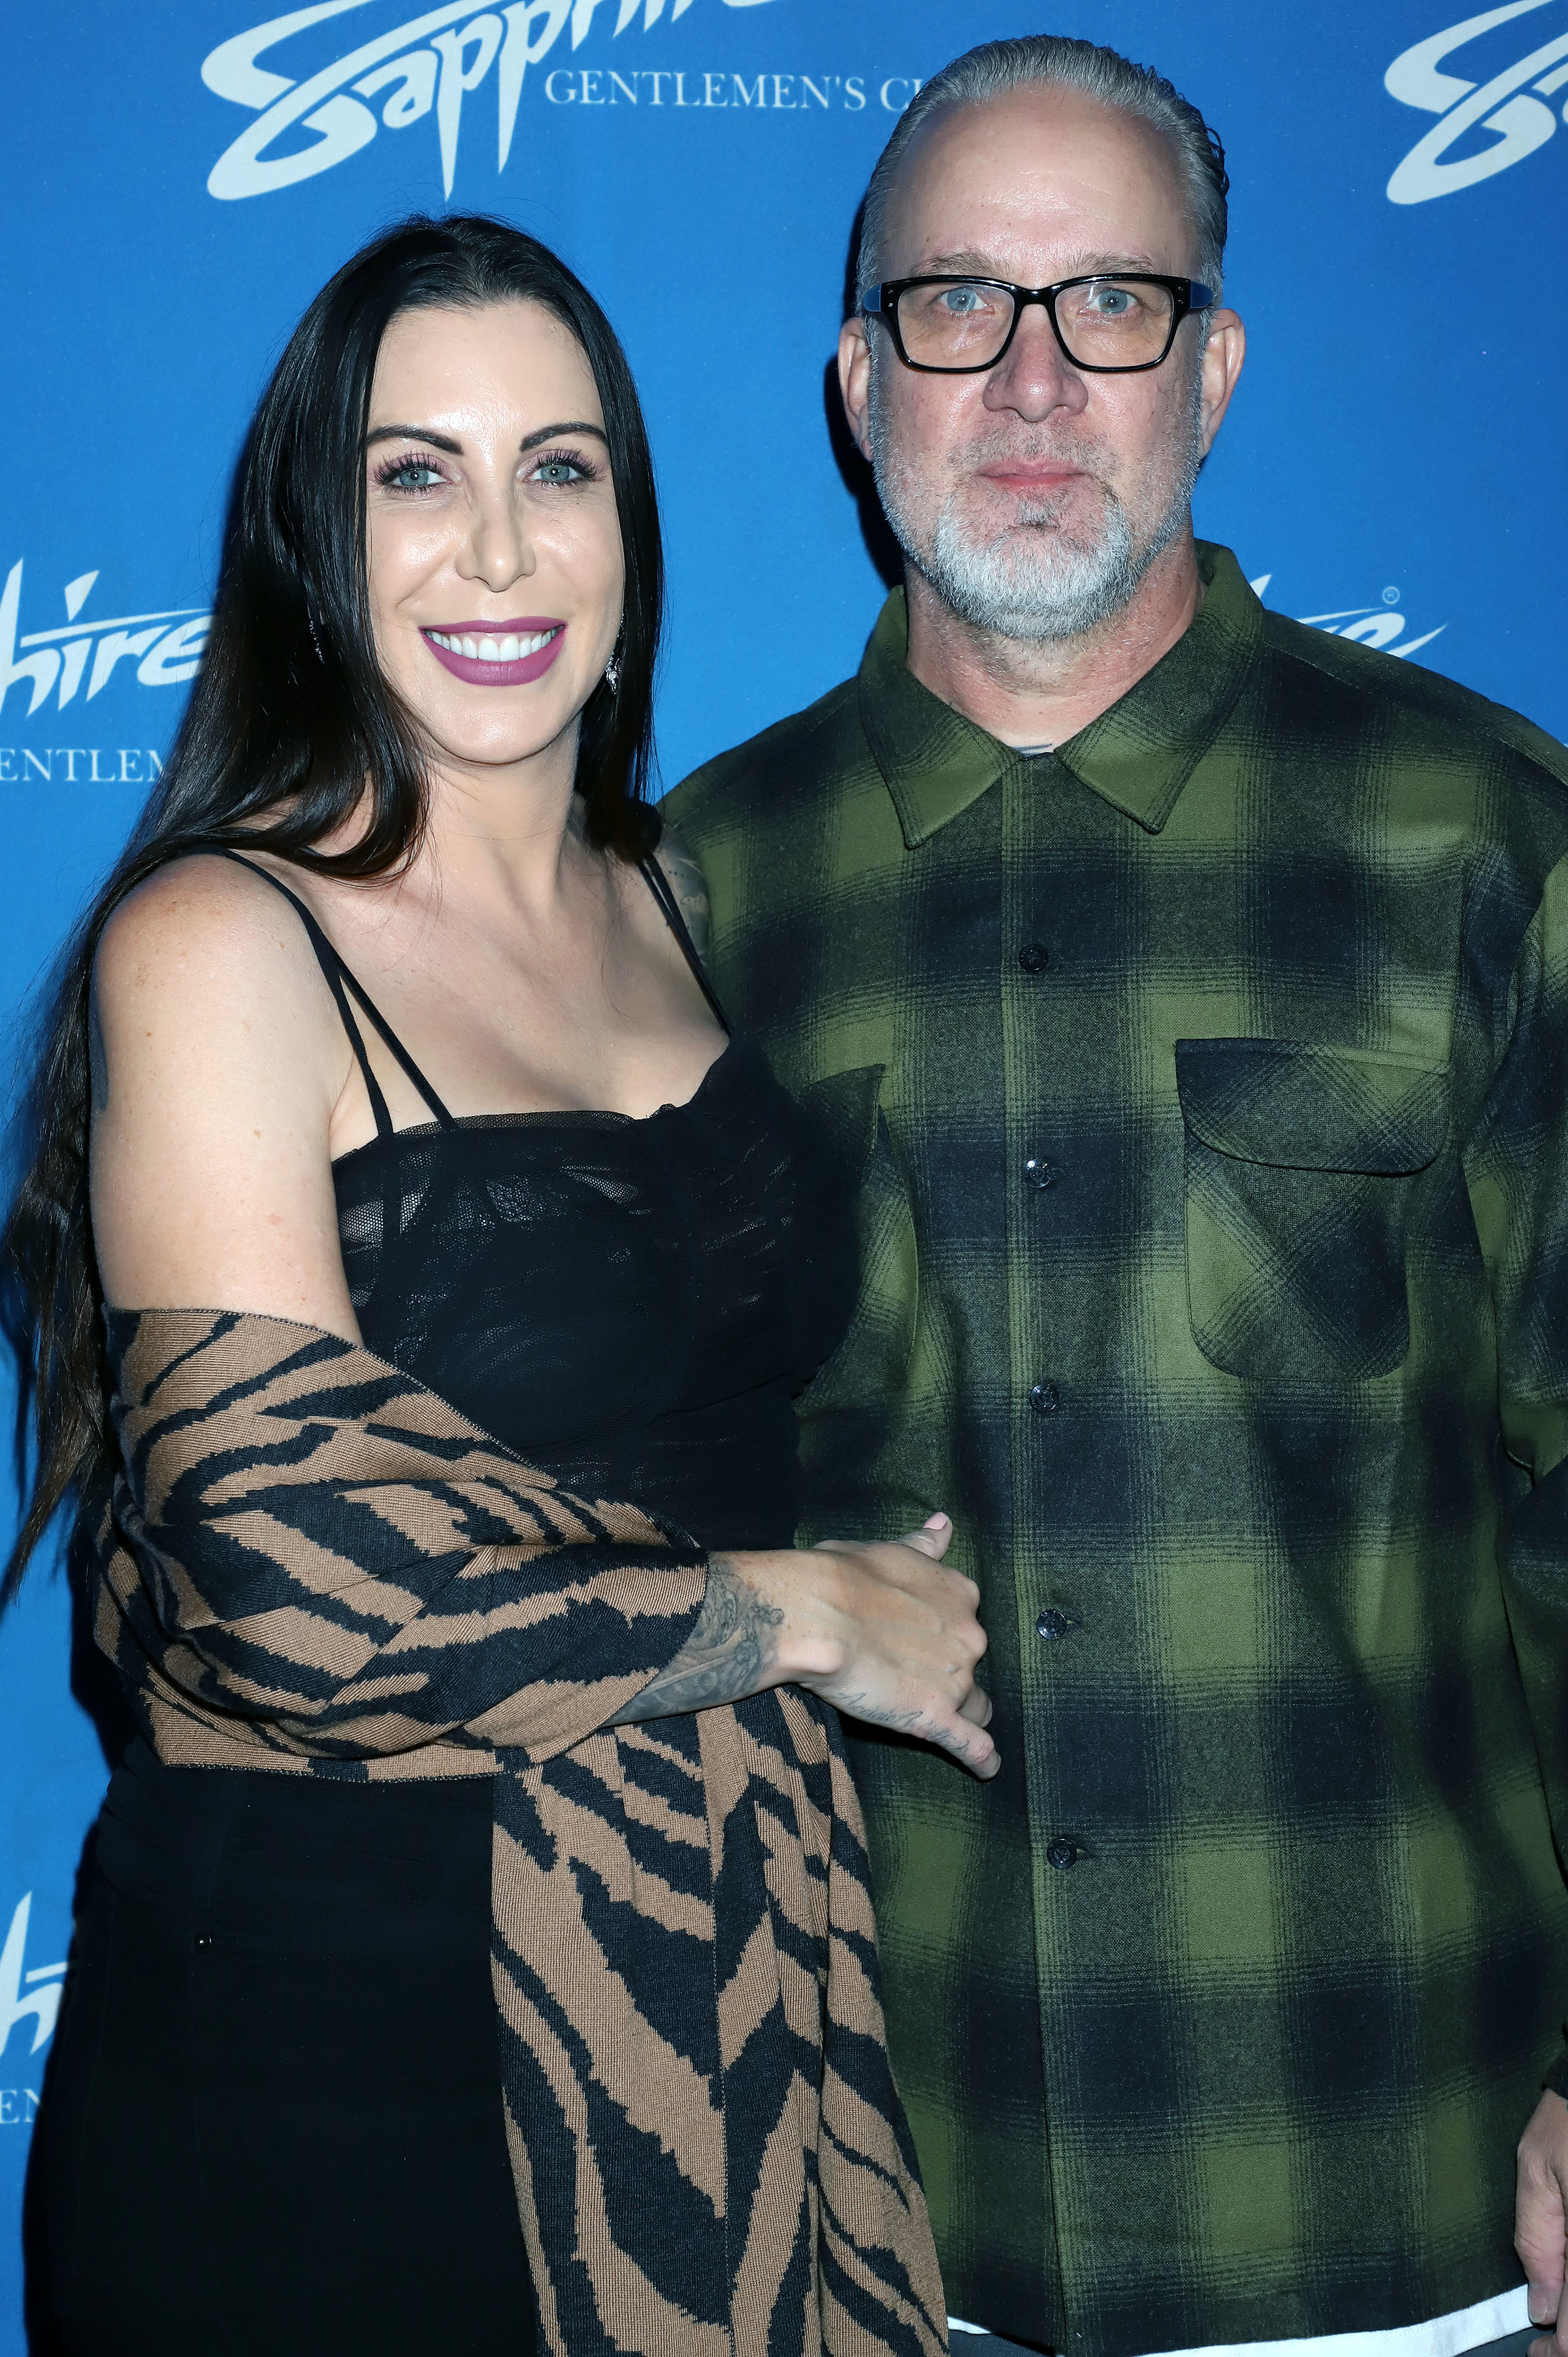 <p>In March 2020, <a href="https://www.wonderwall.com/celebrity/profiles/overview/jesse-james-1200.article">Jesse James</a> took to Instagram to announce that he and his fourth wife, Hot Rod racer Alexis DeJoria, had <a href="https://www.wonderwall.com/celebrity/couples/hannah-brown-tyler-cameron-bachelorette-dating-again-back-together-celeb-love-life-news-mid-march-2020-hollywood-romance-report-3022495.gallery?photoId=1076736">called it quits</a> following seven years of marriage. Just a few weeks later, <a href="https://www.dailymail.co.uk/news/article-8167711/Sandra-Bullocks-ex-Jesse-James-slept-20-women-wife-Alexis-DeJoria.html">DailyMail.com</a> reported that, according to a source, he cheated on her with at least 20 different women. "Jesse has been cheating on her since they first met, it never stopped. ... She discovered he was bringing women into their home [in Austin, Texas], sleeping in their bed," a source said, adding that Alexis first discovered Jesse was cheating two years before she finally threw in the towel when he failed to change his ways. The insider alleged that Jesse even cheated on Alexis the night before he proposed to her in late 2012. In 2017, a hairstylist told a tabloid that <a href="https://www.wonderwall.com/celebrity/couples/kate-beckinsale-dating-young-comedian-more-celebrity-love-life-updates-june-2017-romance-report-3007491.gallery?photoId=1006371">she and Jesse sexted for several months on social media</a> and that <a href="https://www.wonderwall.com/celebrity/courteney-cox-would-love-have-baby-johnny-mcdaid-plus-more-news-3007488.gallery?photoId=90776">he invited her to his home to take things to the next level</a>, though they never ended up getting physical with each other. Jesse also cheated on his third wife...</p>